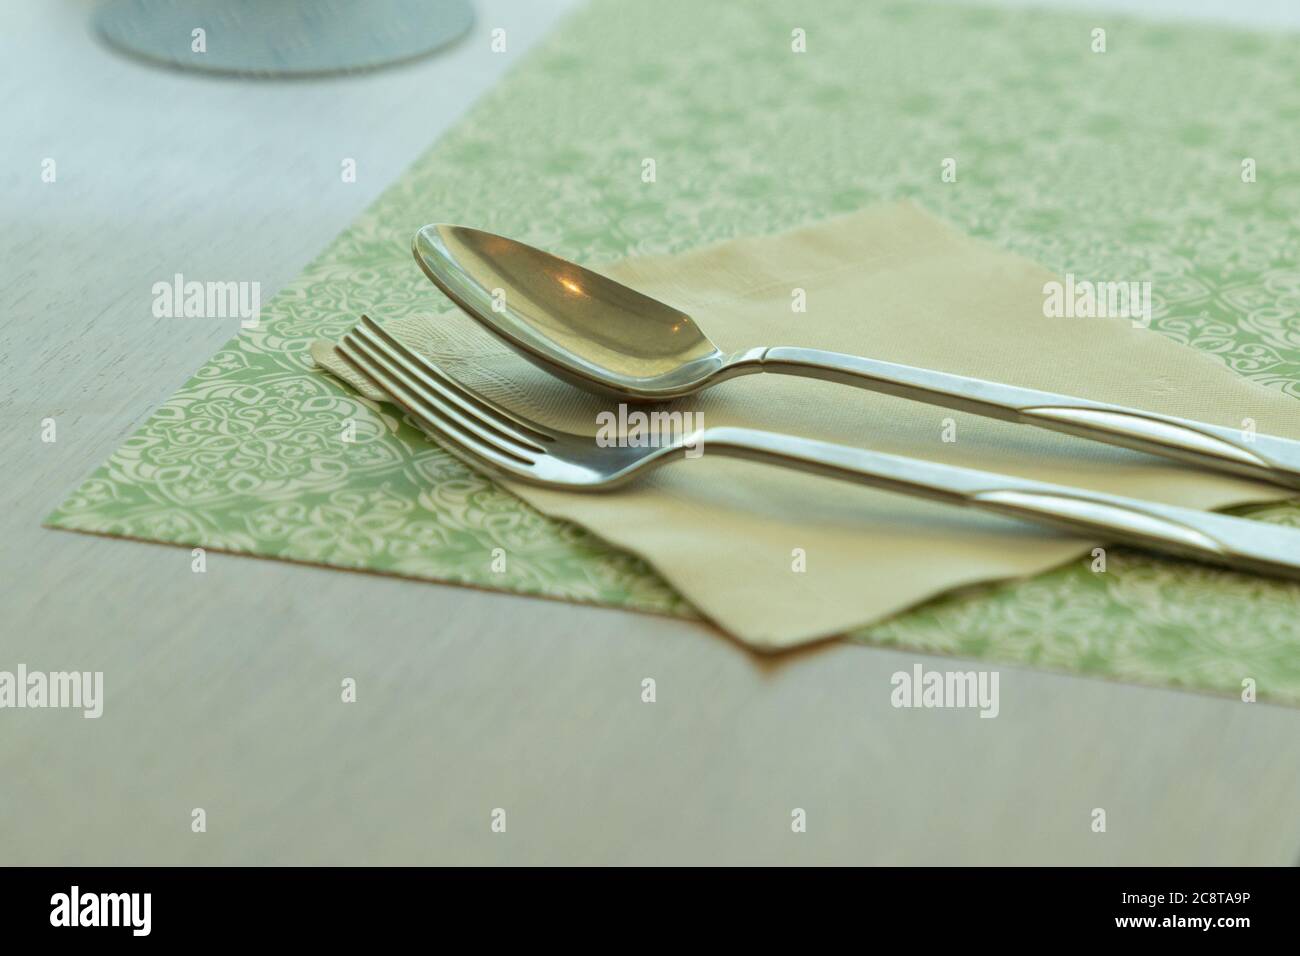 Antique Silverware Place Setting, a Table Cloth with Room for Text or Copy. Stock Photo